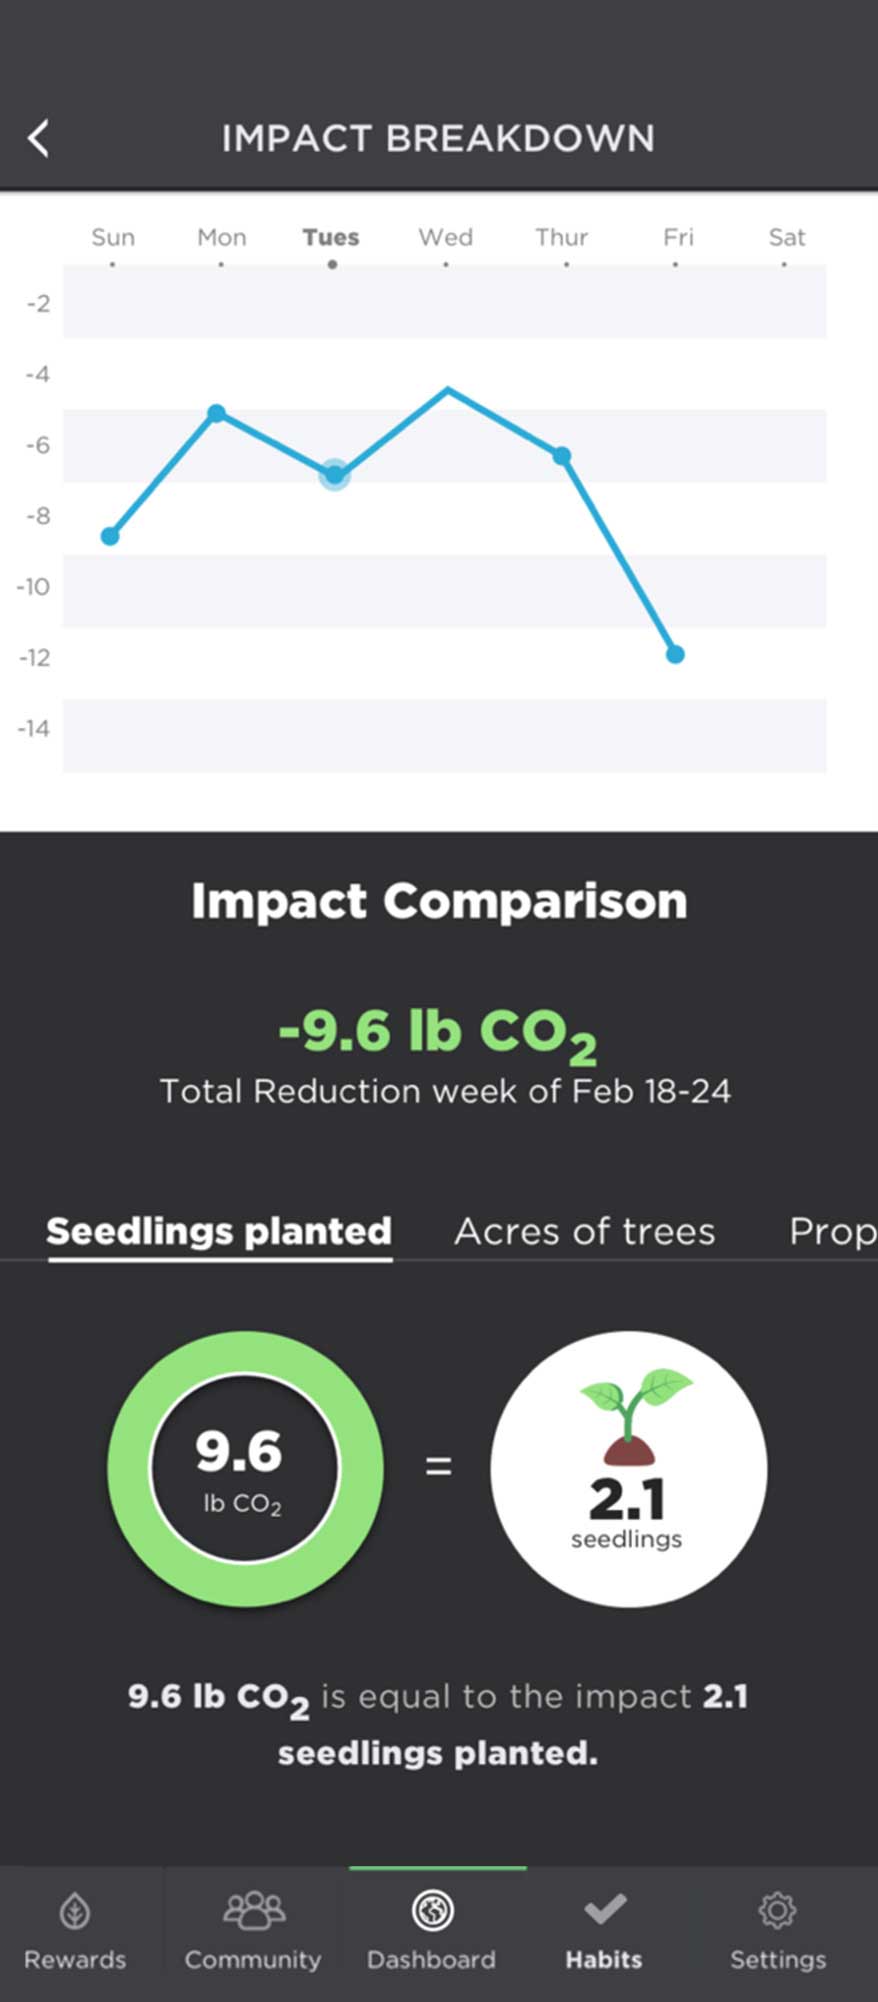 Impact breakdown screen demonstrating what their CO2 reductions mean. For example, 9.6 lb CO2 is equal to the impact of 2.1 seedlings planted.